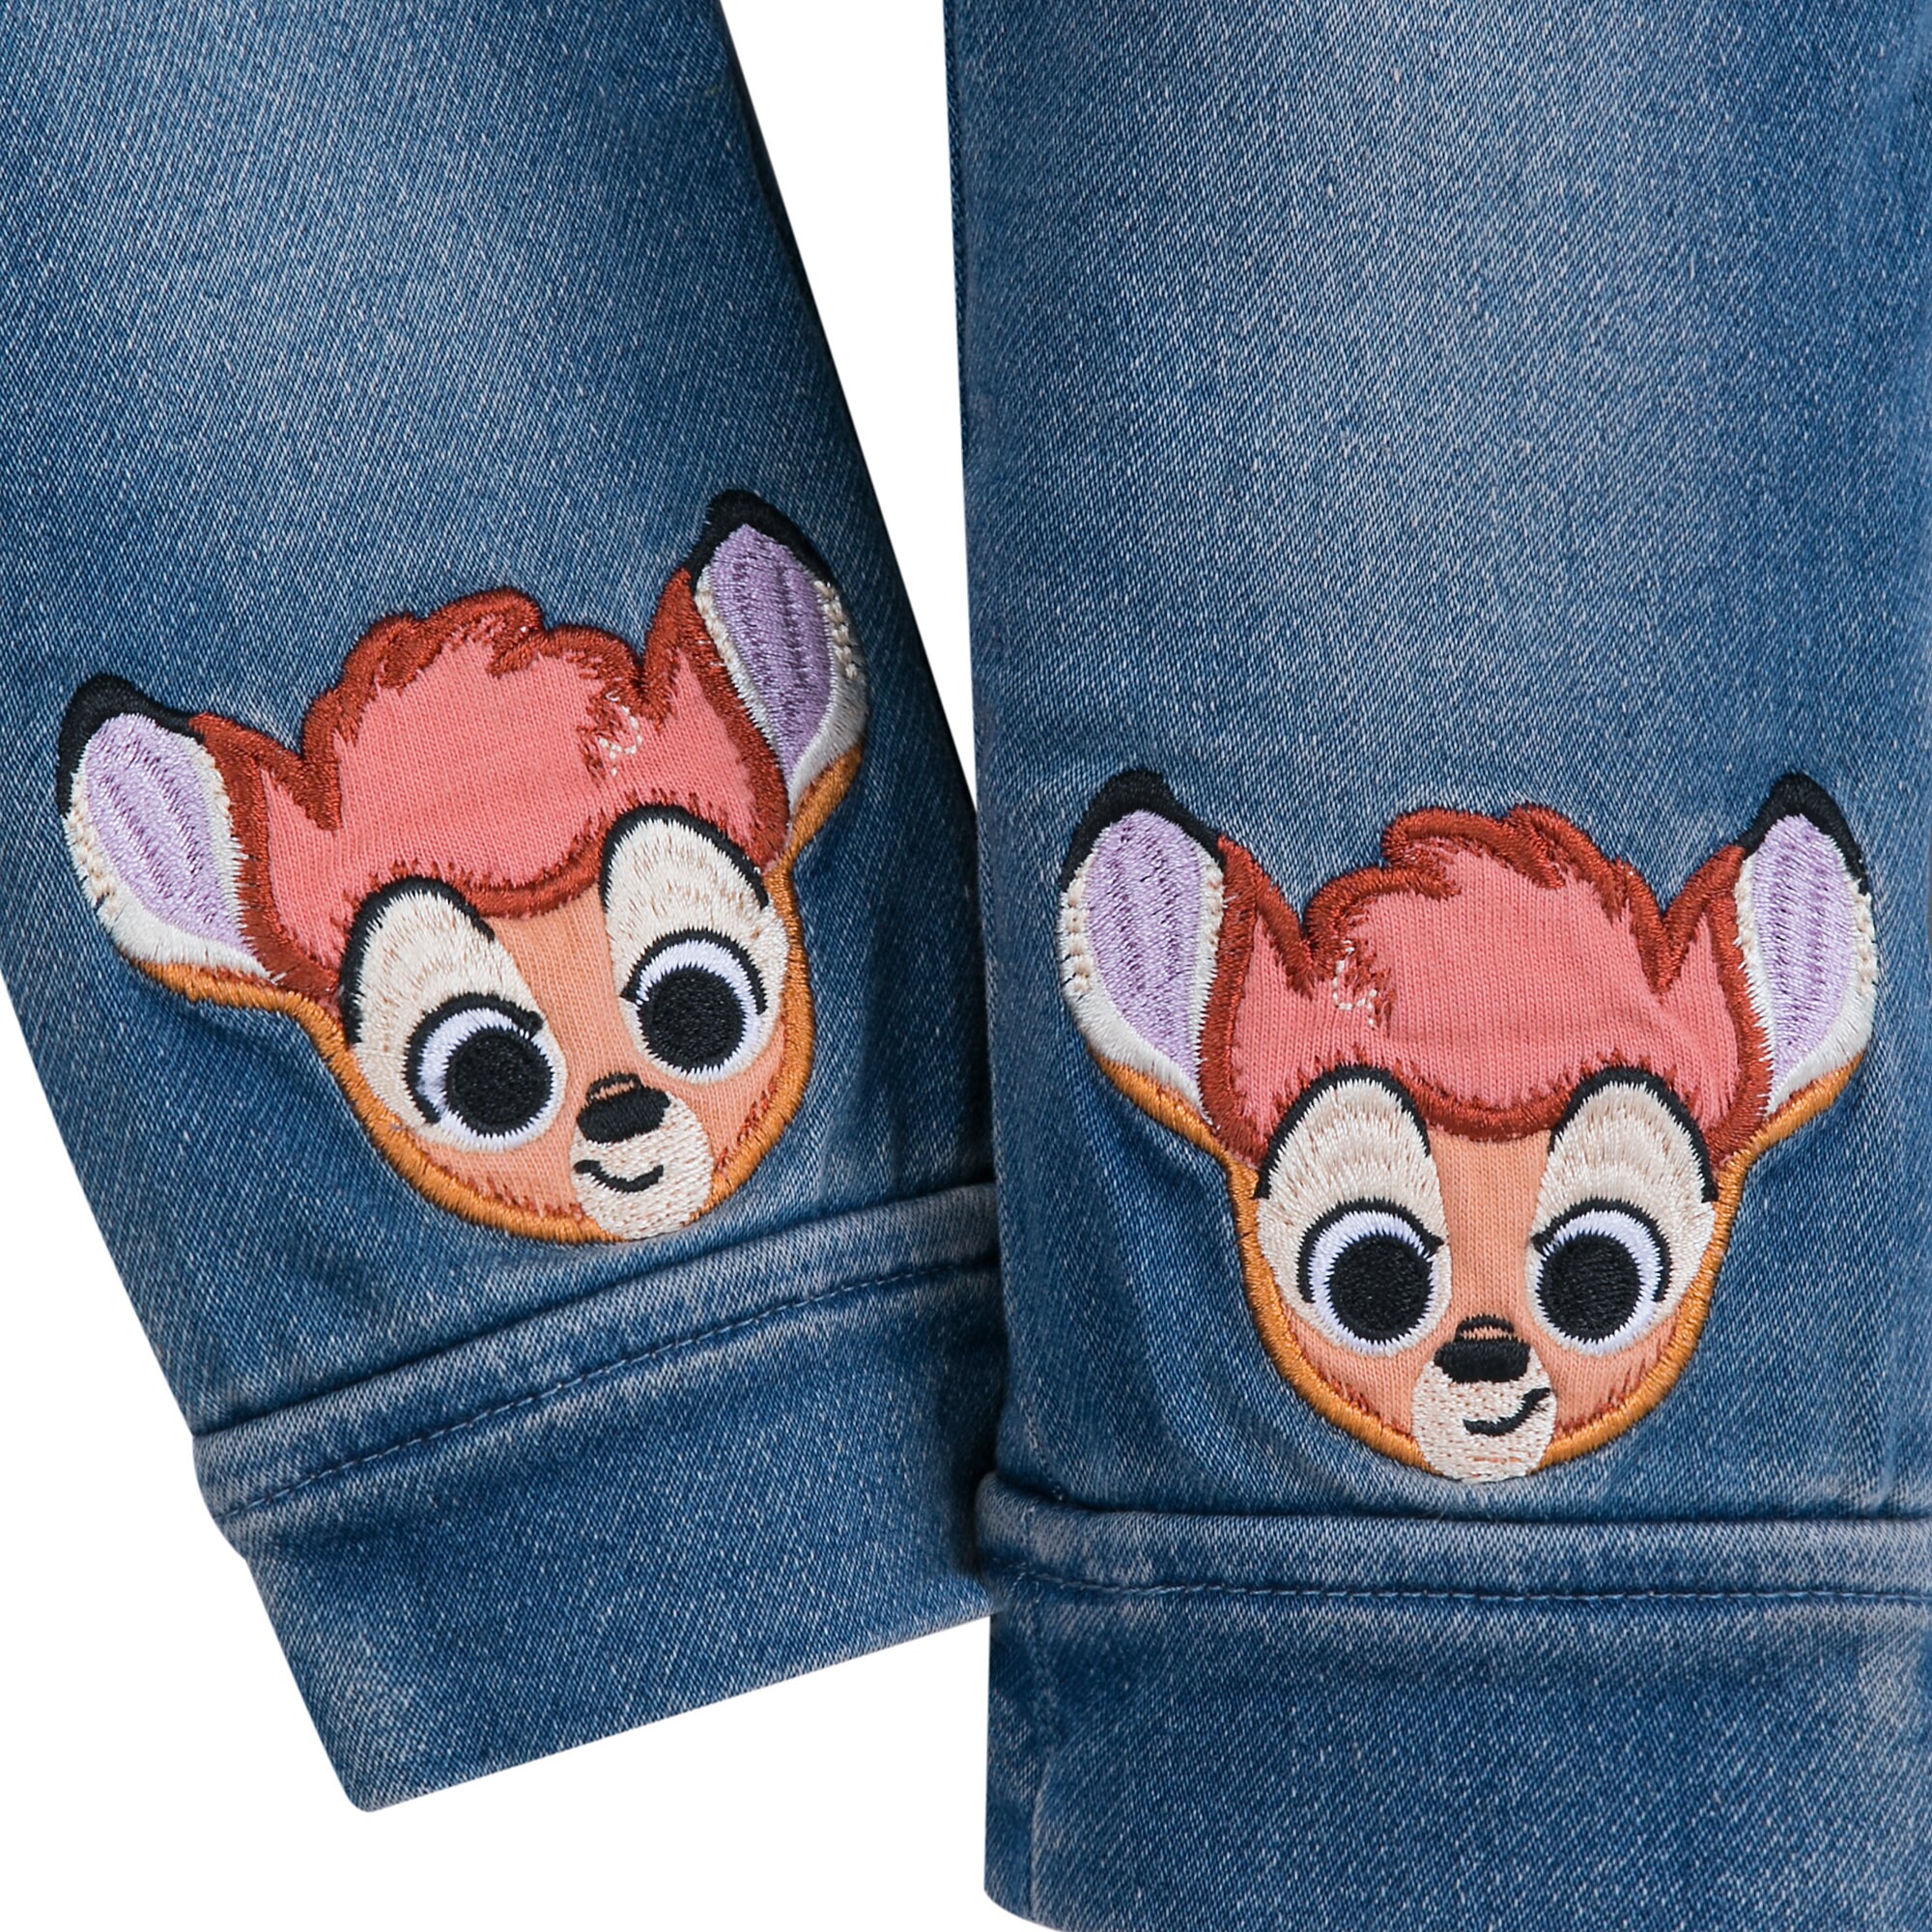 Bambi Striped Top and Jean Set for Girls - Disney Furrytale friends